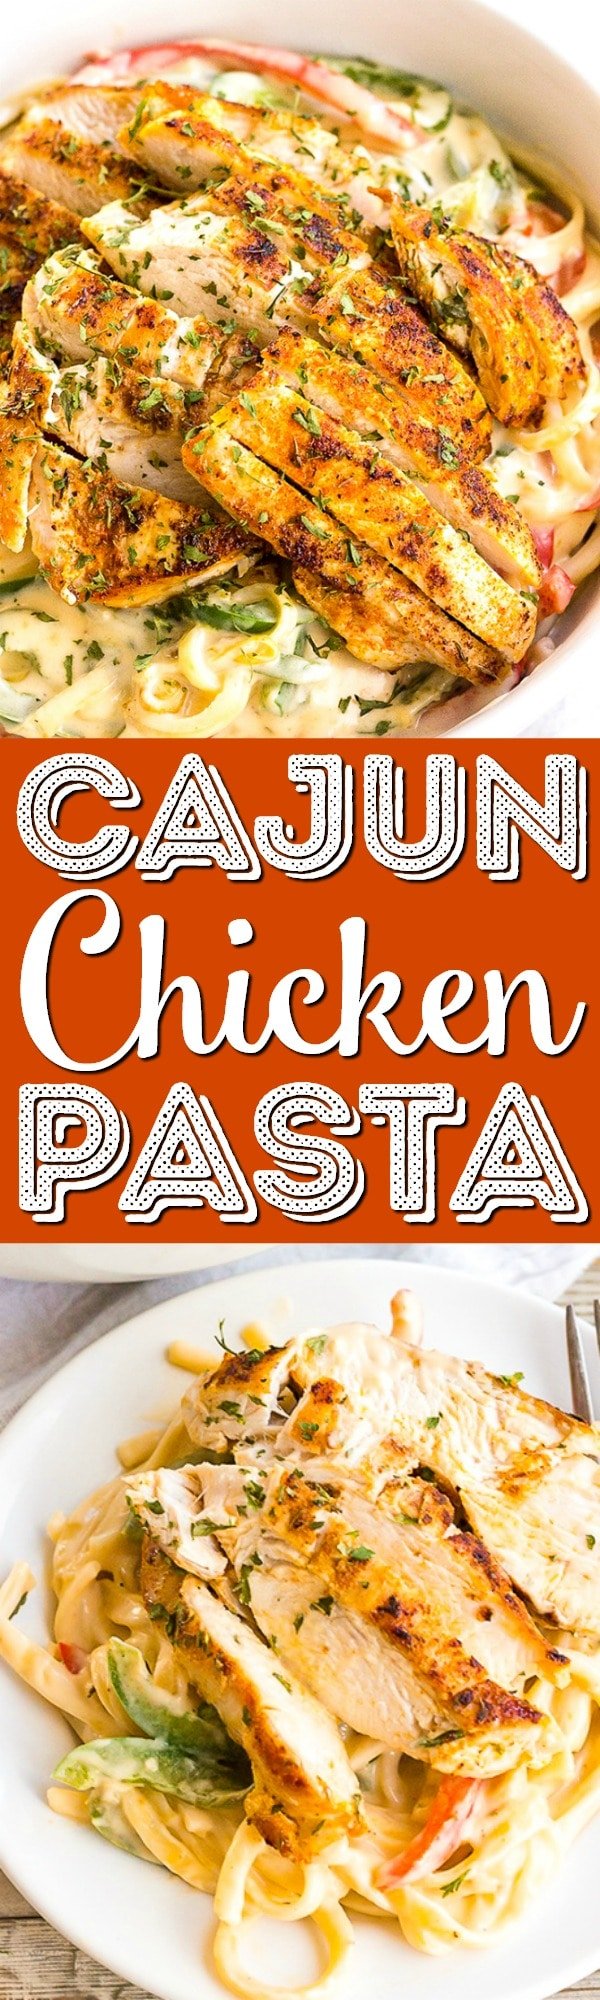 This creamy Cajun Chicken Pasta is a flavorful dinner that's great for busy weeknights! Easy to make and oh so tasty, this dinner is a definite keeper! via @sugarandsoulco